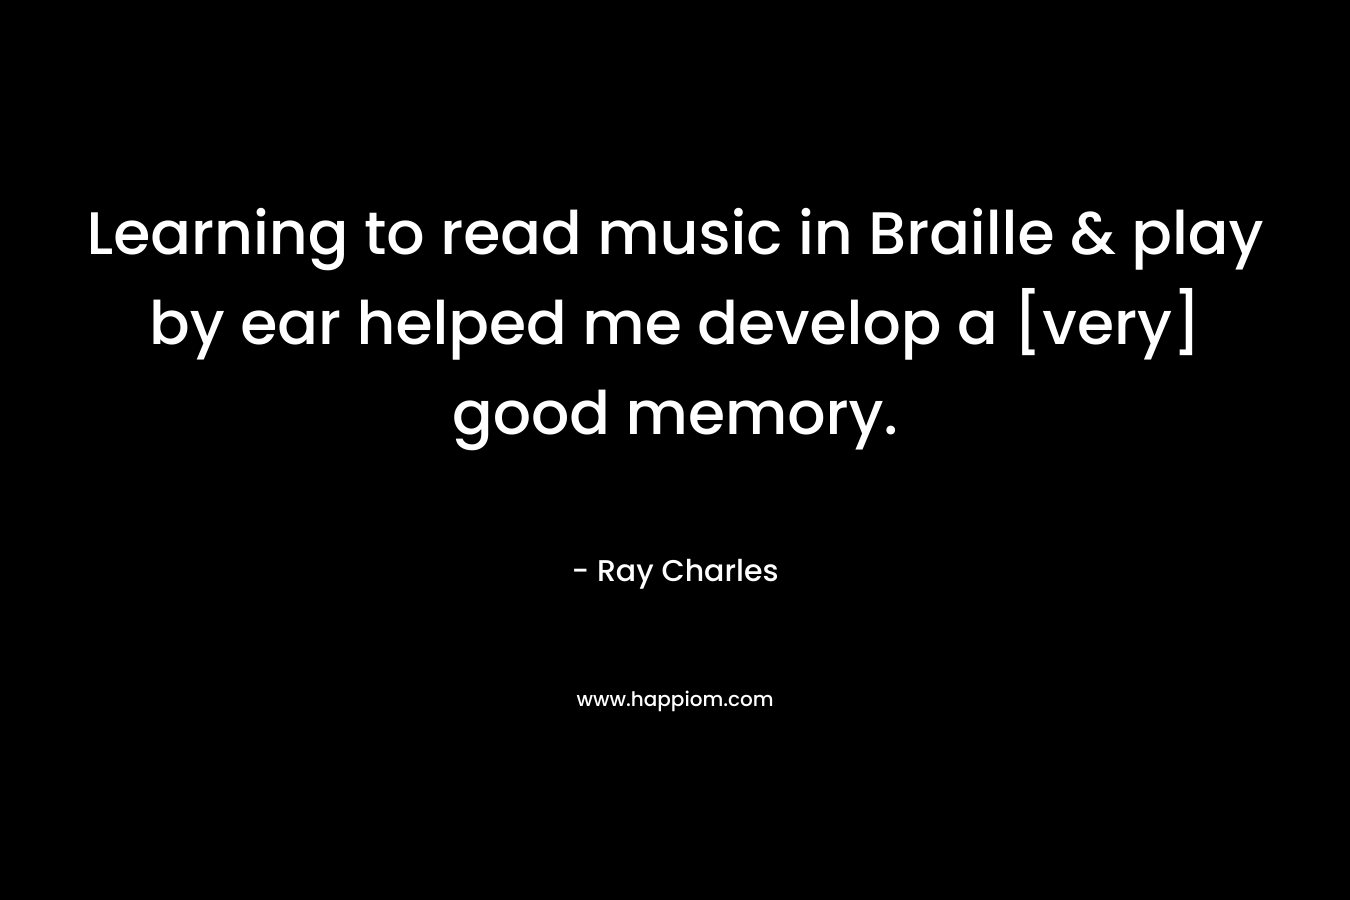 Learning to read music in Braille & play by ear helped me develop a [very] good memory.